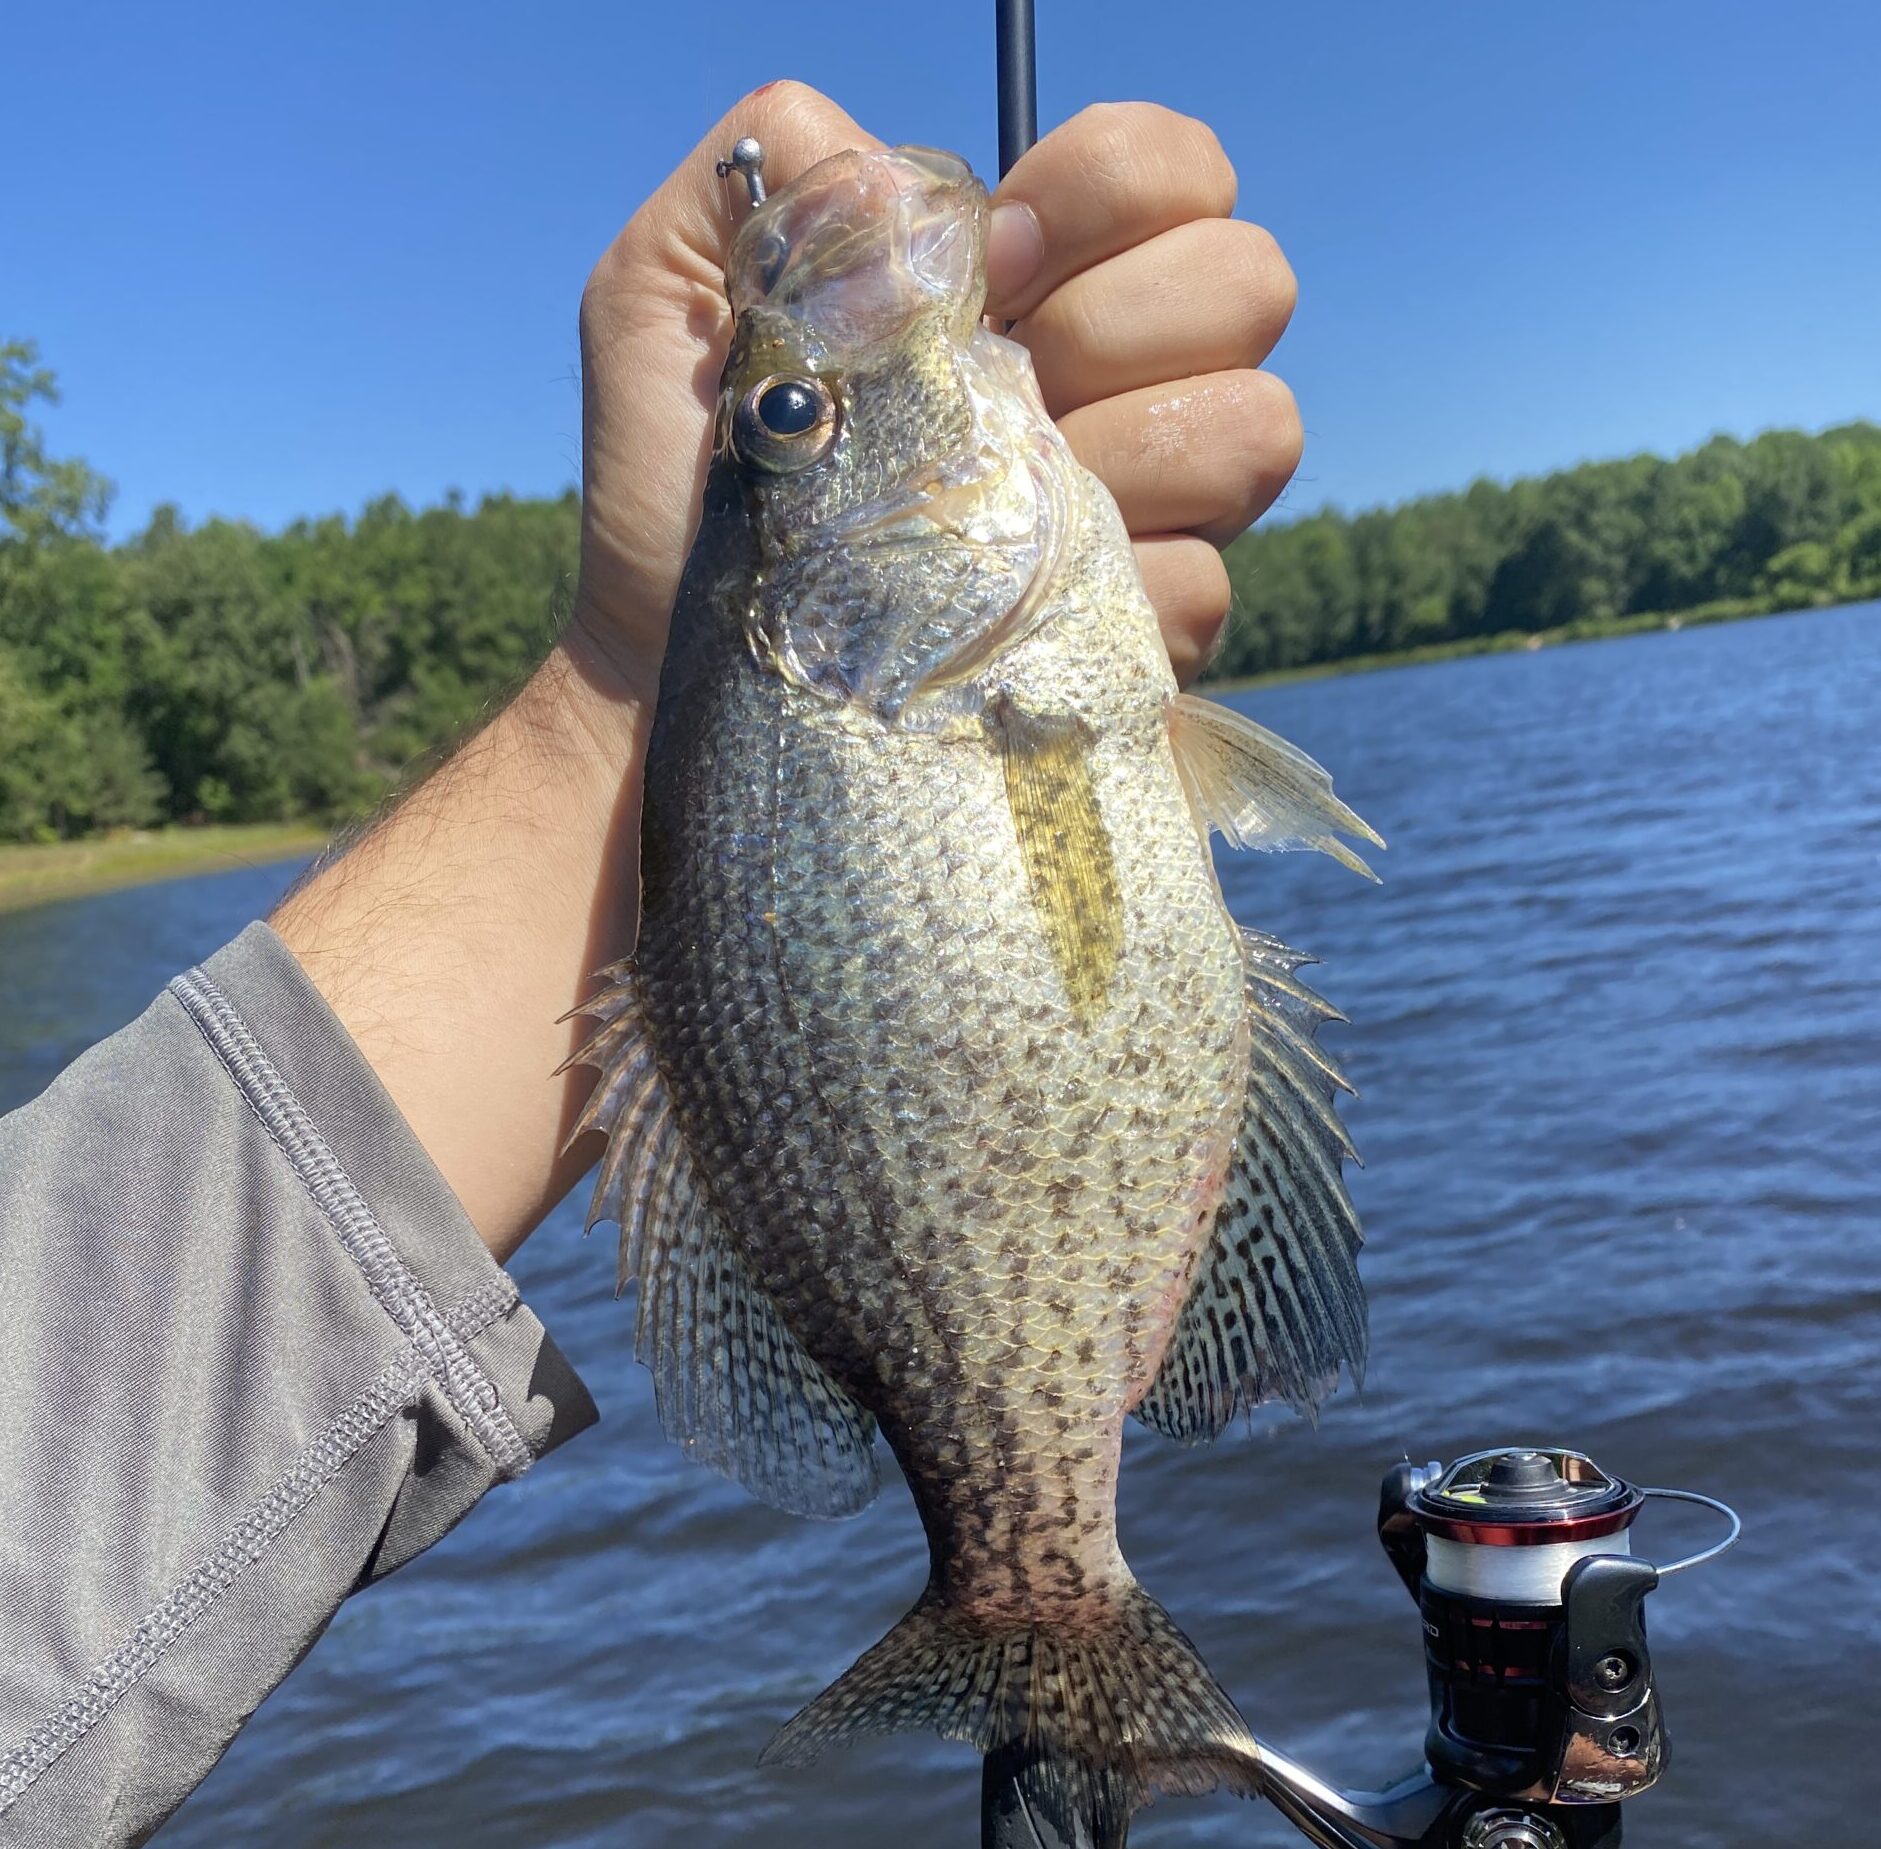 The Southern Pro Lil Hustler was used to catch this crappie